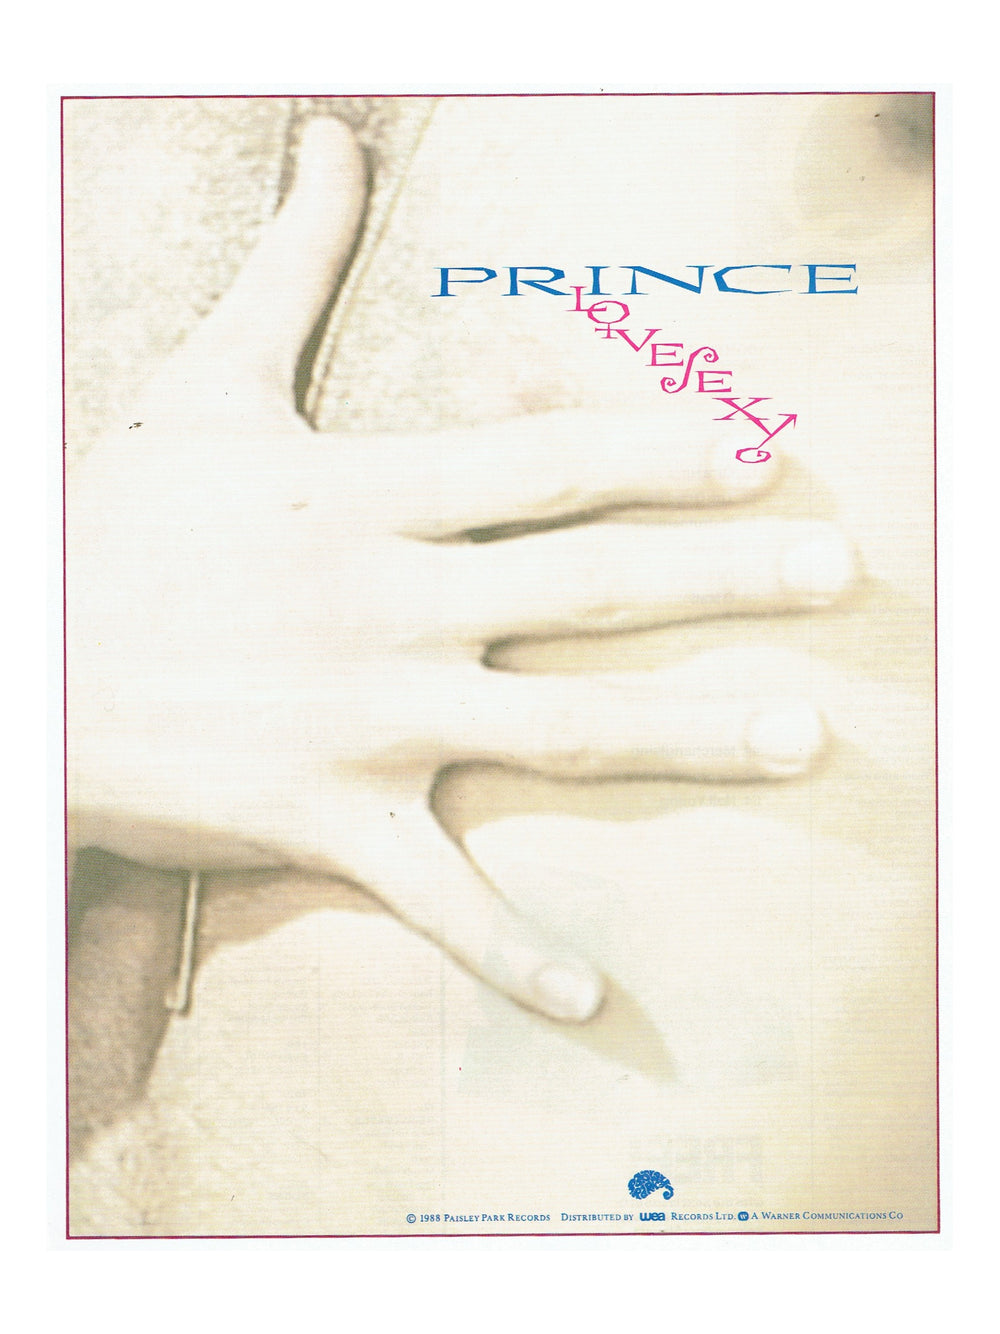 Prince – Lovesexy Official Trade Magazine Advert Ideal For Framing Prince